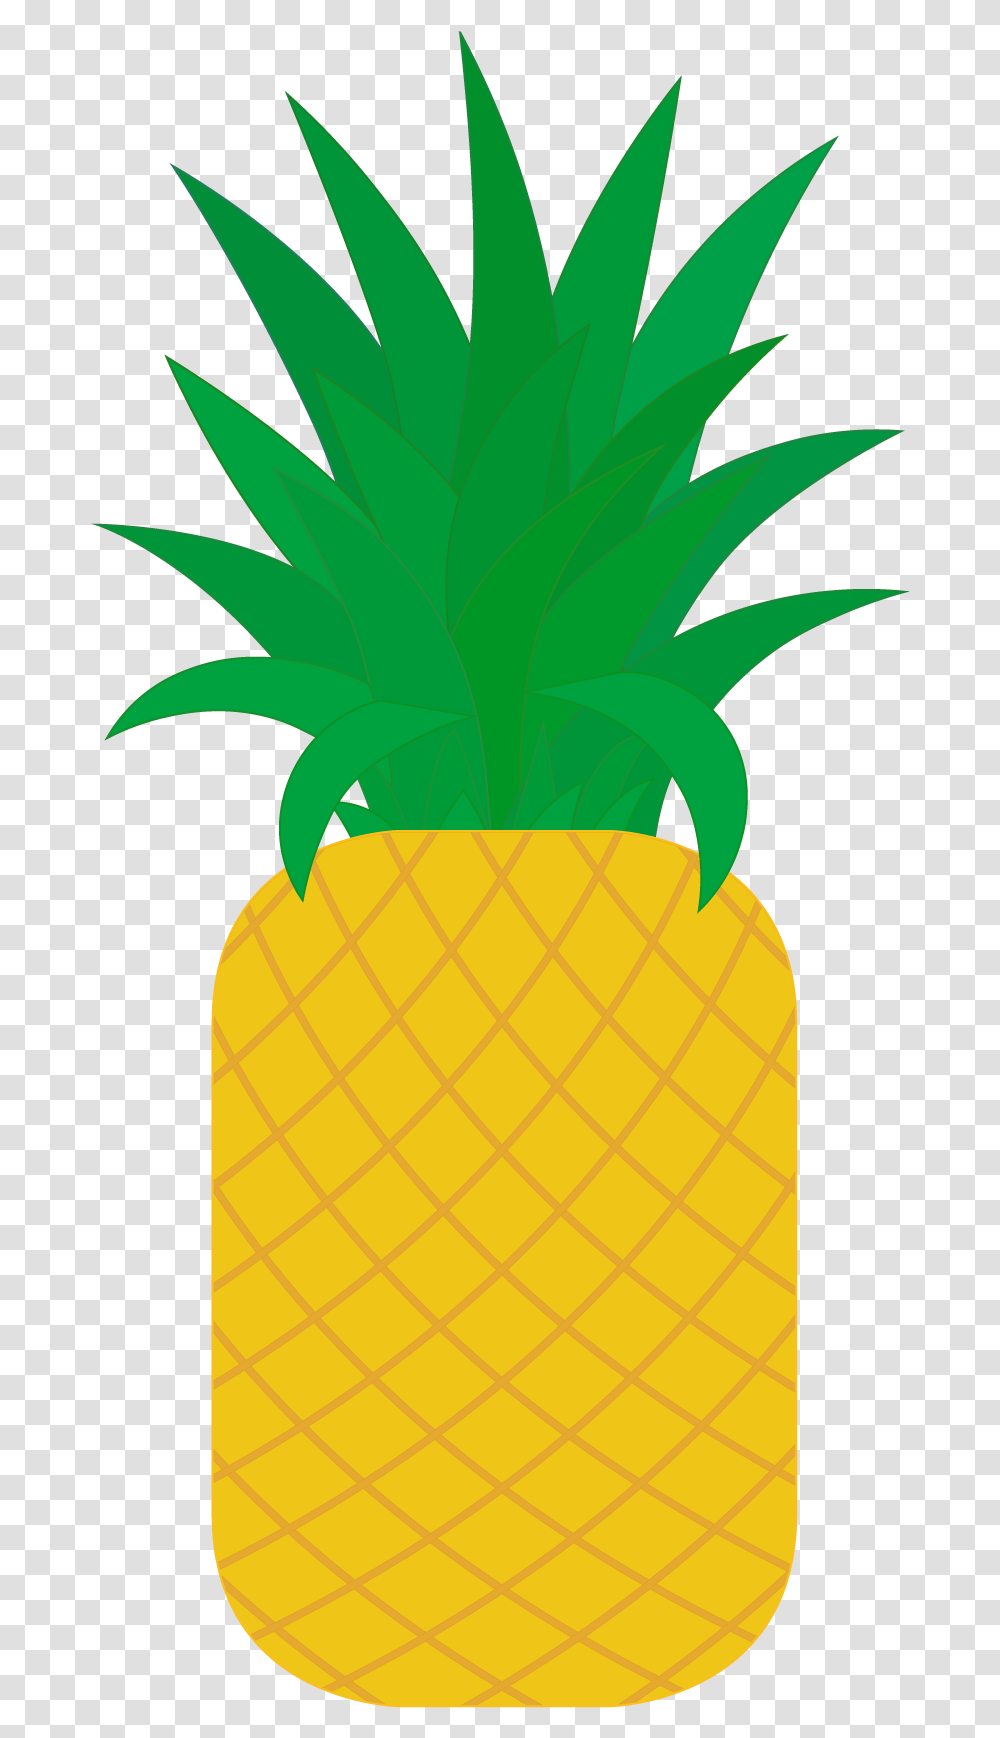 Flat Pineapple Poster Tropical Fruit And Vector Vector Fruit, Plant, Food, Tree, Palm Tree Transparent Png